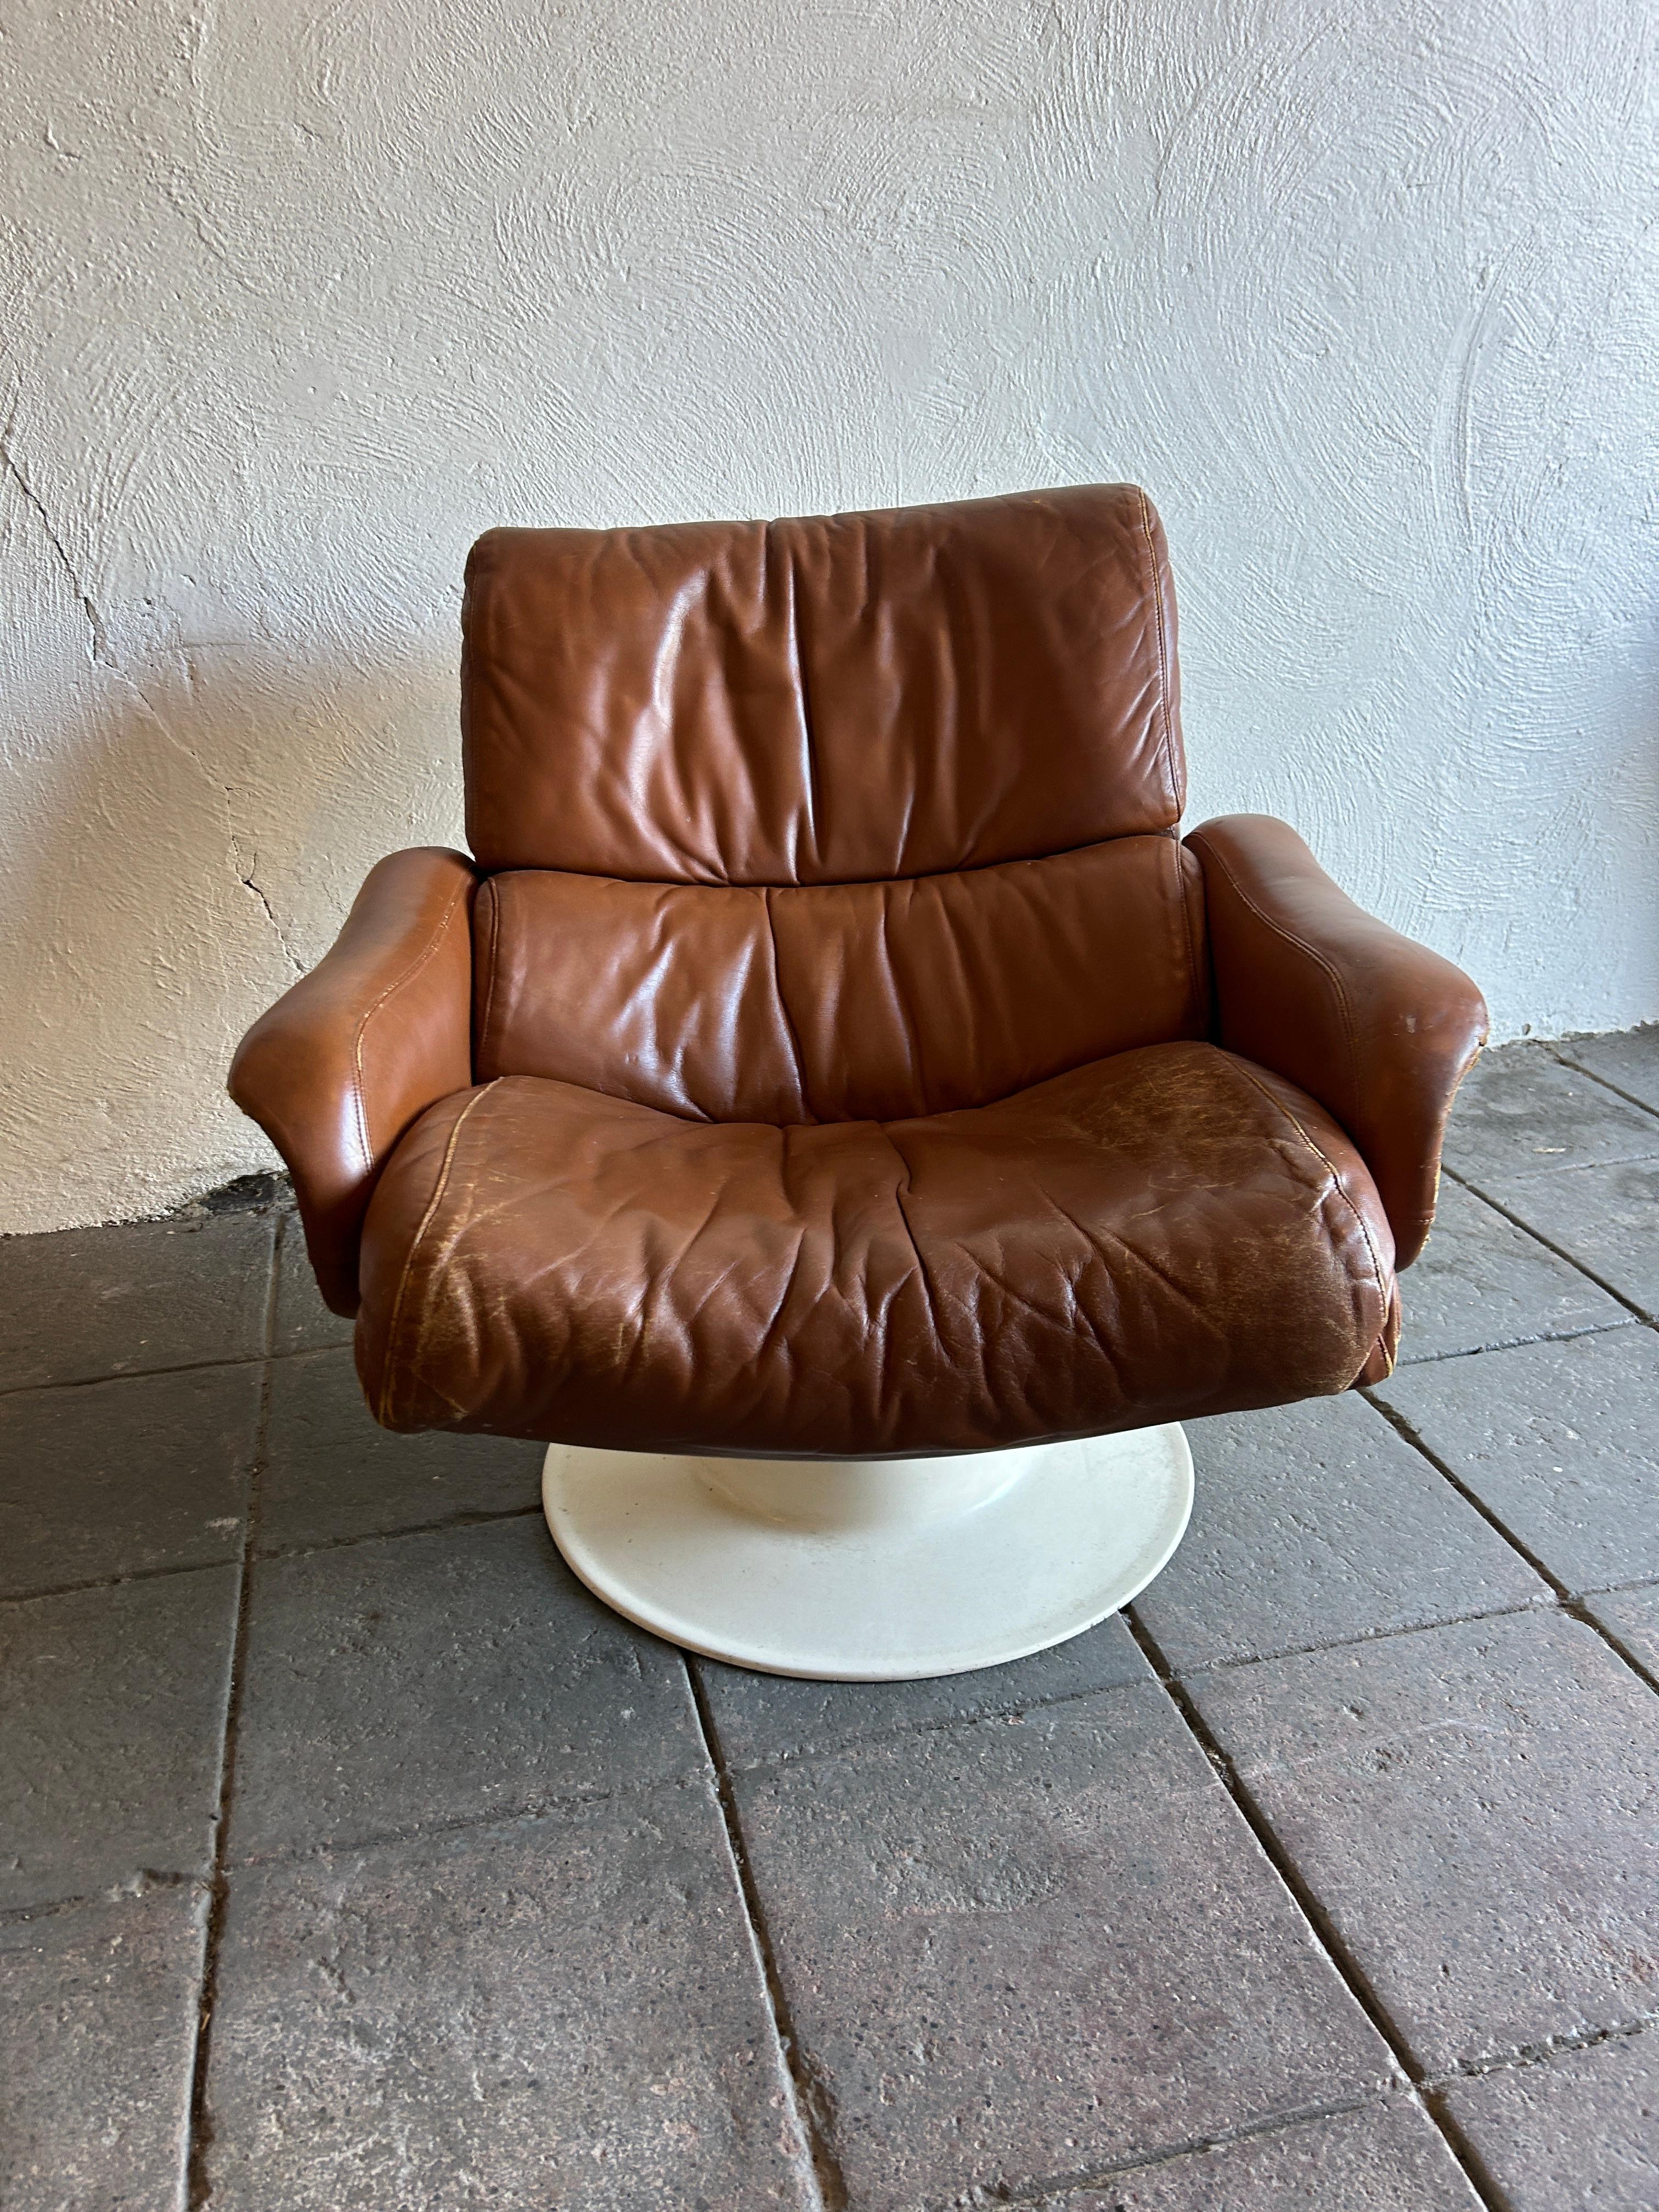 Rare Mid century modern space age brown leather and Fiberglass lounge chair. Designed by Yrjo Kukkapuro Saturn Lounge
Chair Model B-175-18. Circa 1960 made in Finland. Chair is vintage and the leather shows patina tiny chips to fiberglass. Labeled